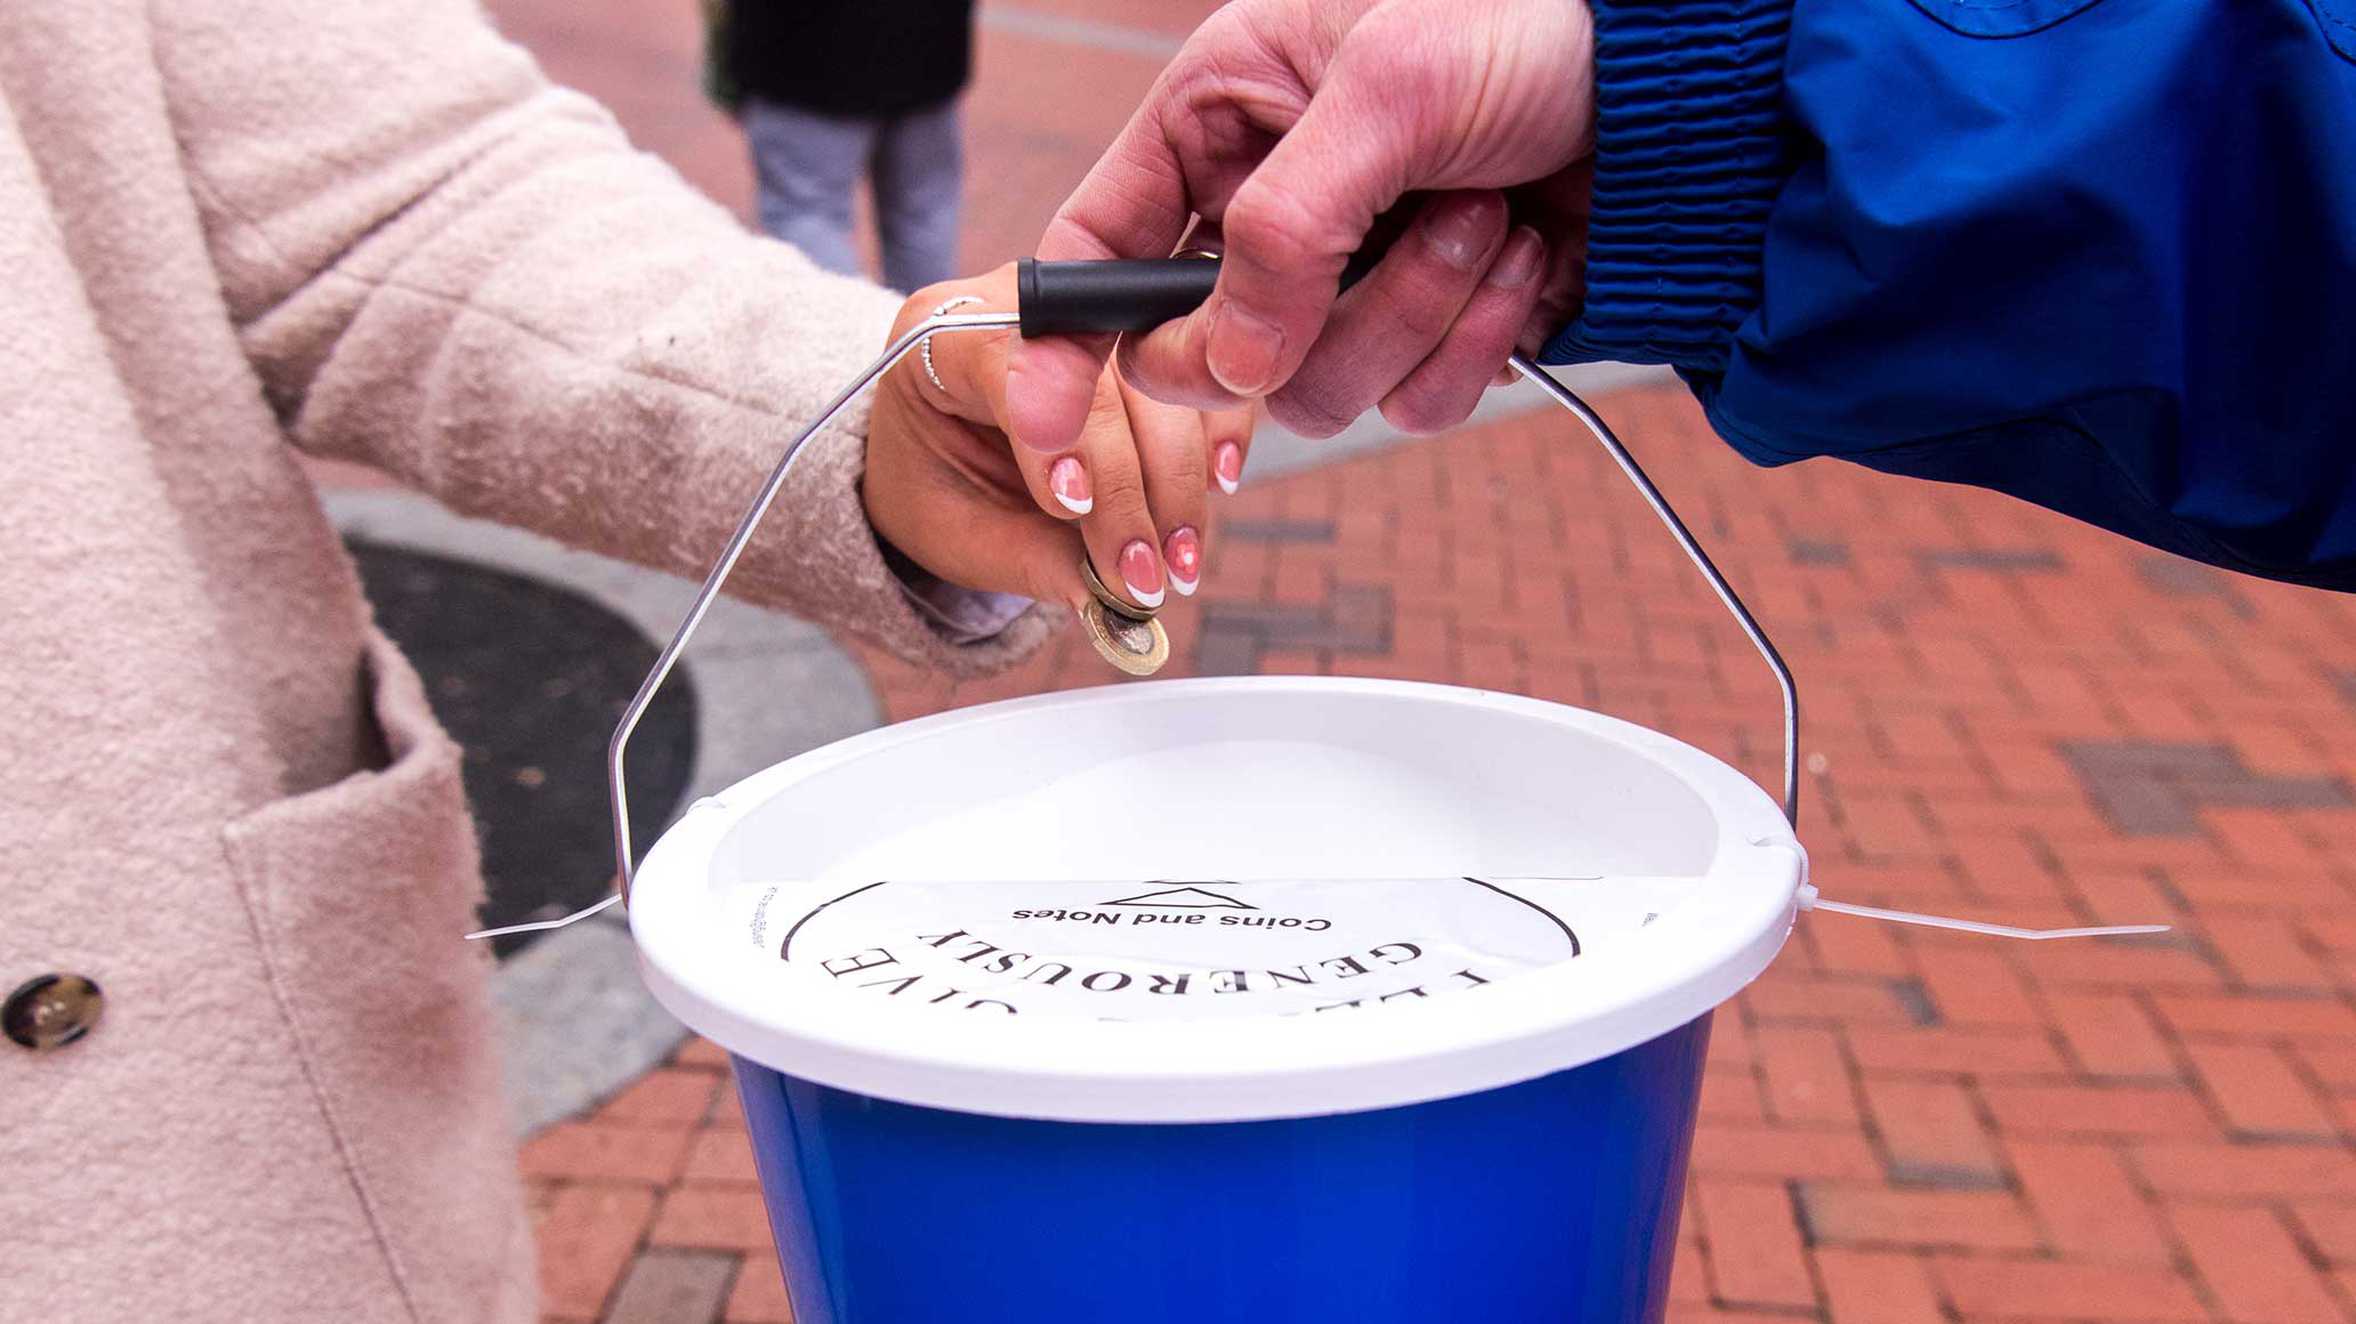 Someone putting money into a donation bucket.